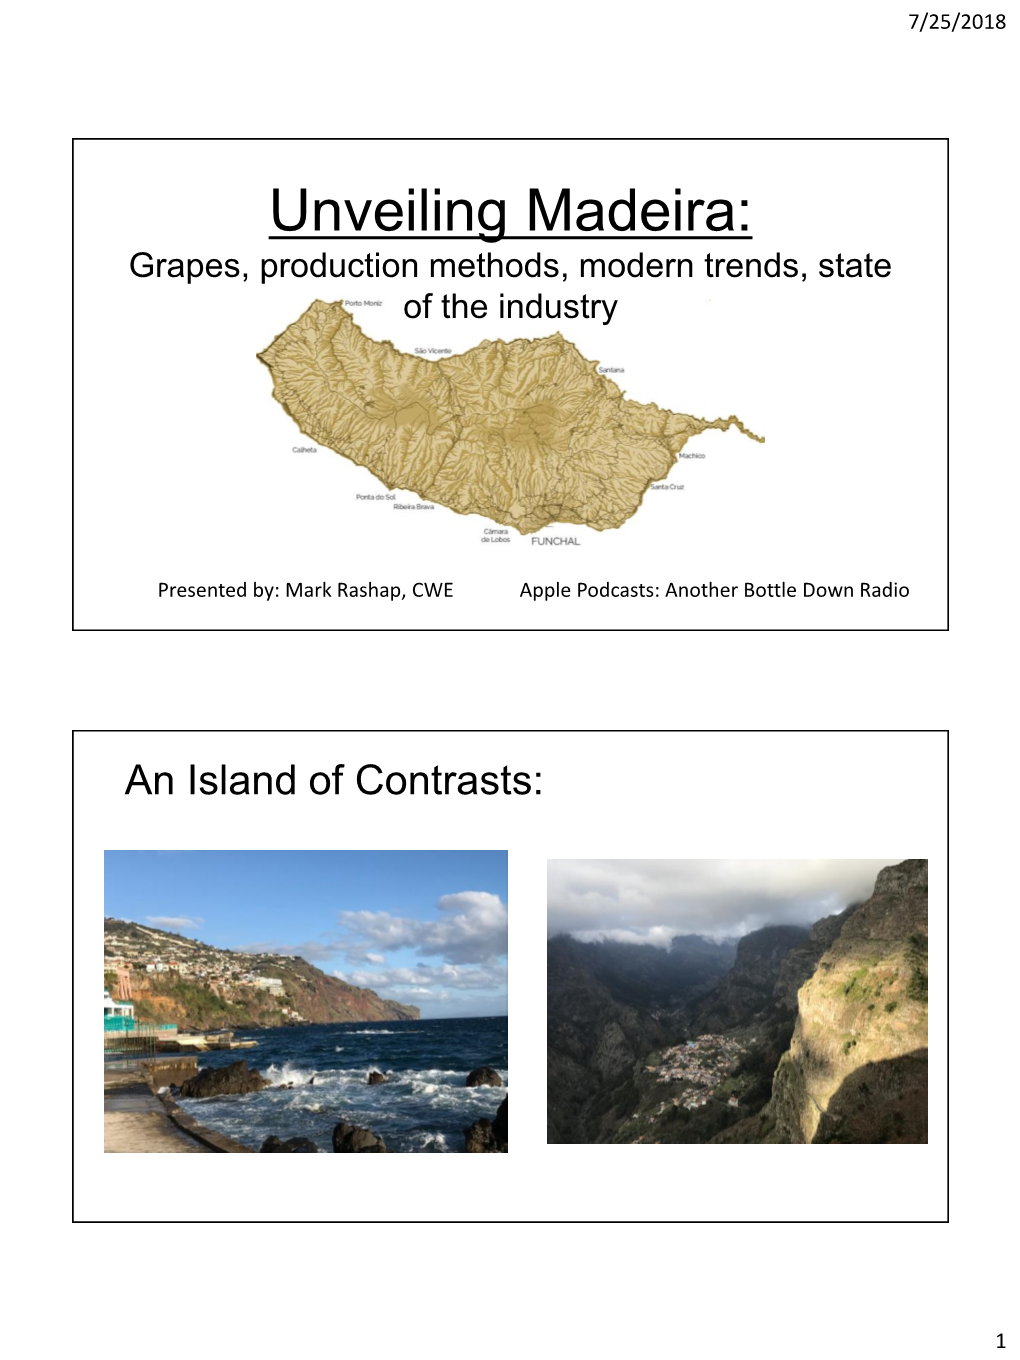 Unveiling Madeira: Grapes, Production Methods, Modern Trends, State of the Industry